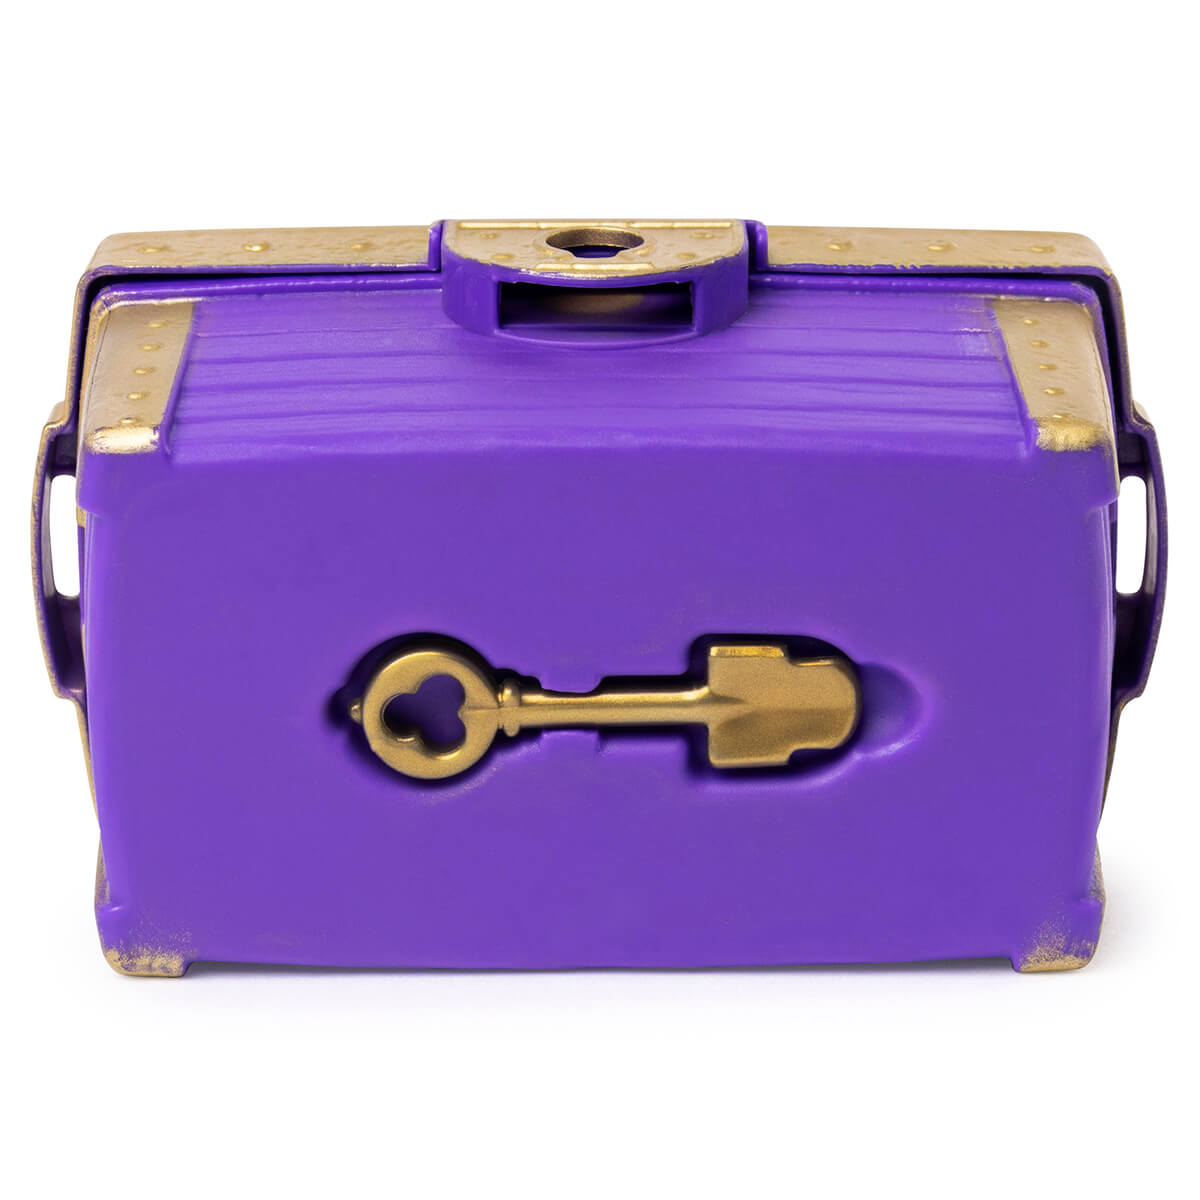 Bottom of treasure chest, which has a hidden key tool.